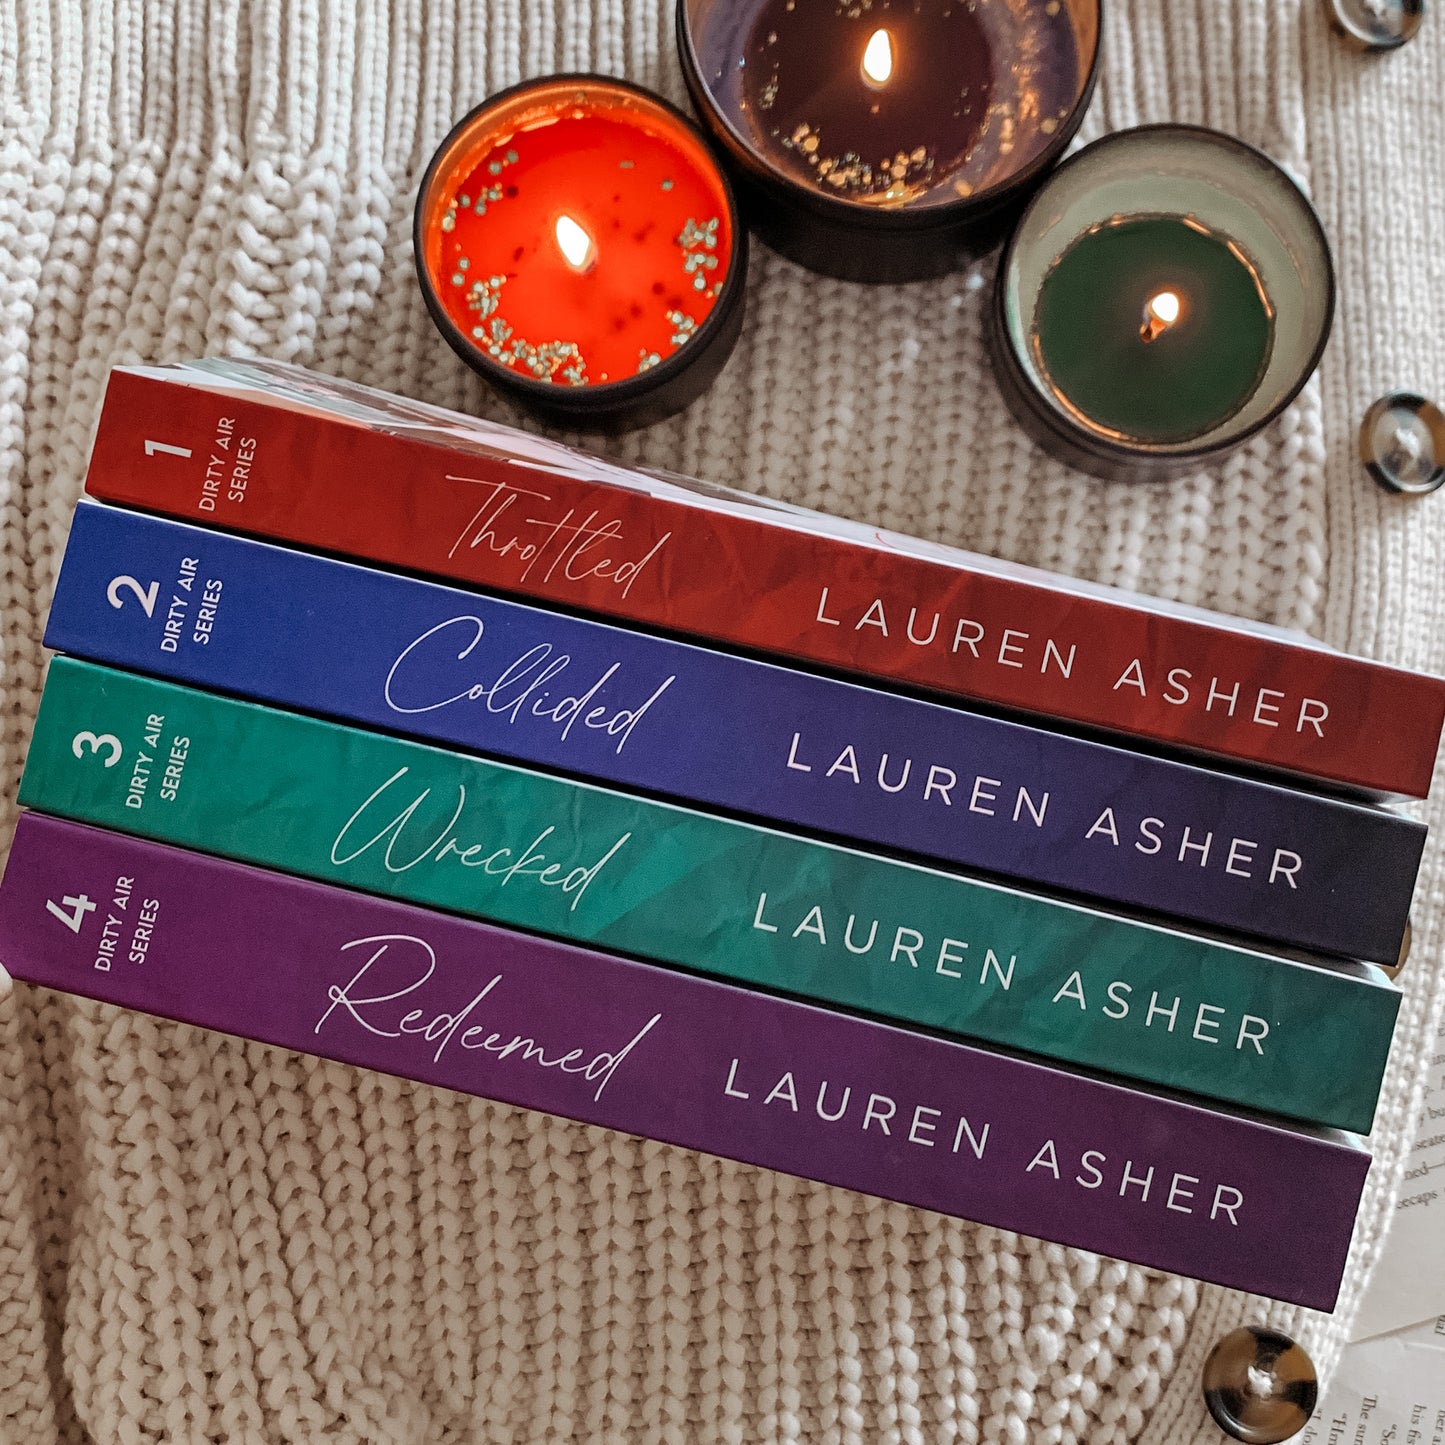 Dirty Air series (Special Editions) by Lauren Asher